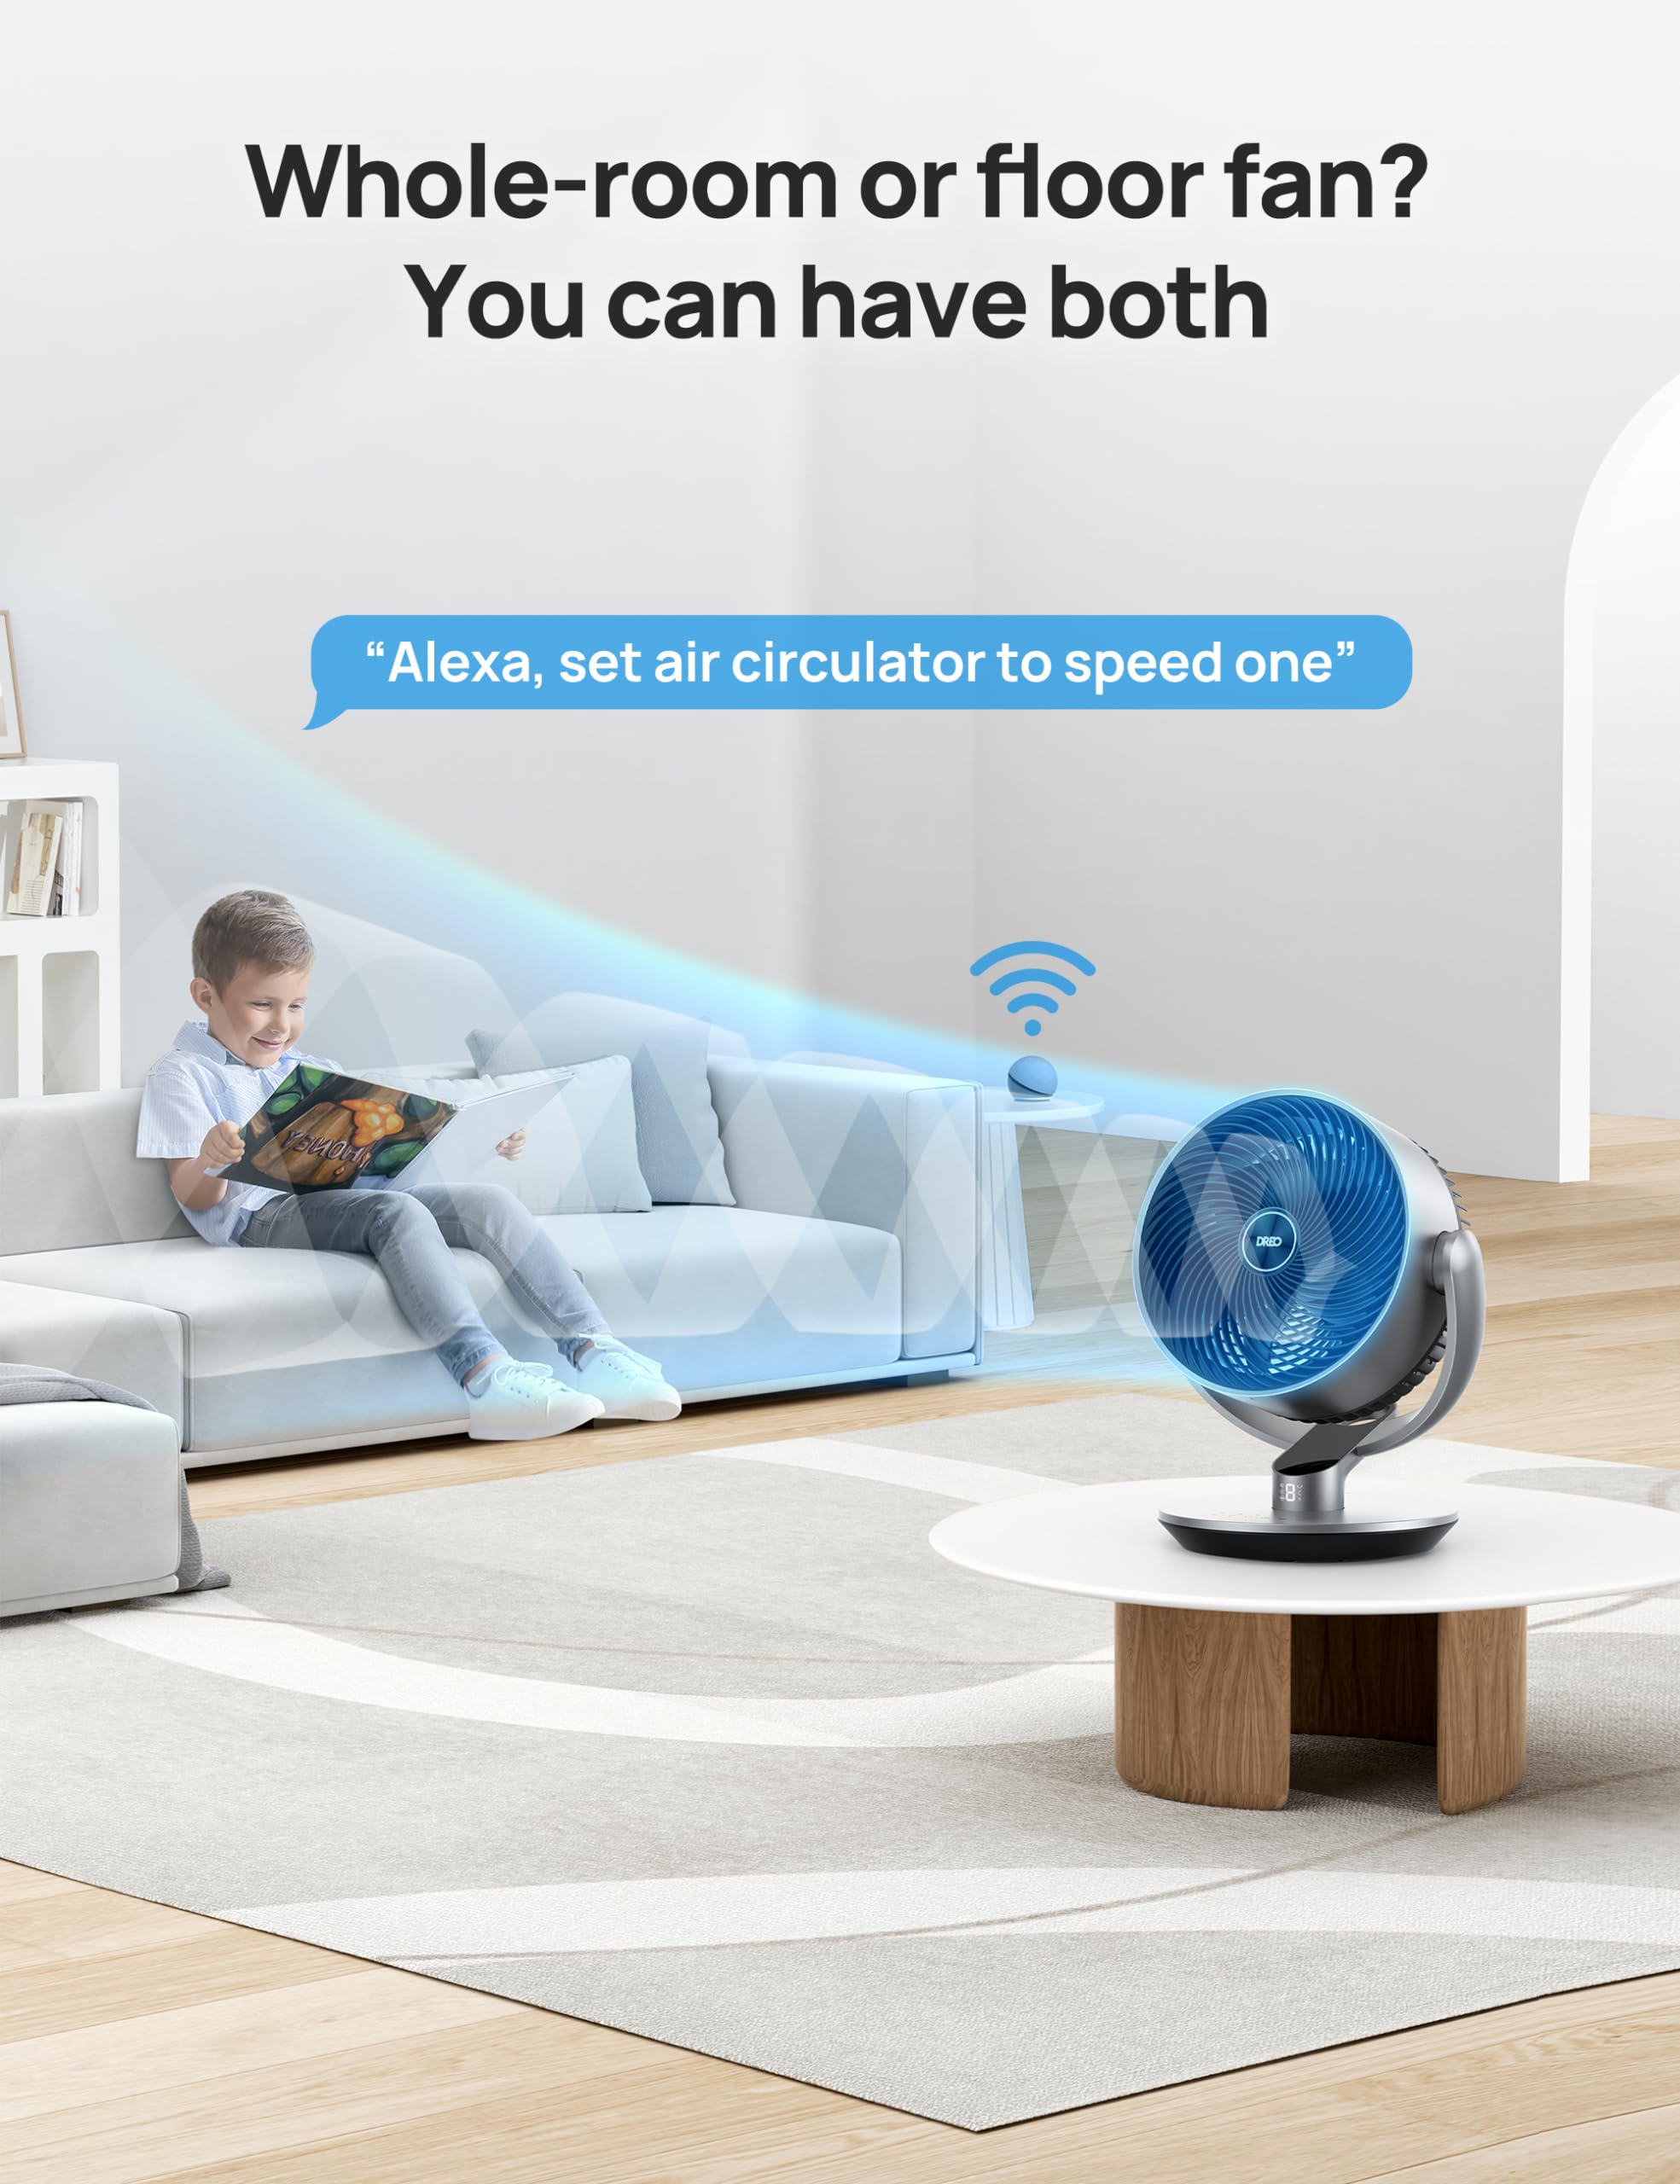 Dreo Smart Fans for Bedroom, 11 Inch, 25dB Quiet DC Room Fan with Remote, 120°+90° Oscillating Fan, 6 Modes, 9 Speeds, 12H Timer,Works Alexa/Google/WiFi/Voice Control, Black and Silver, Oversize